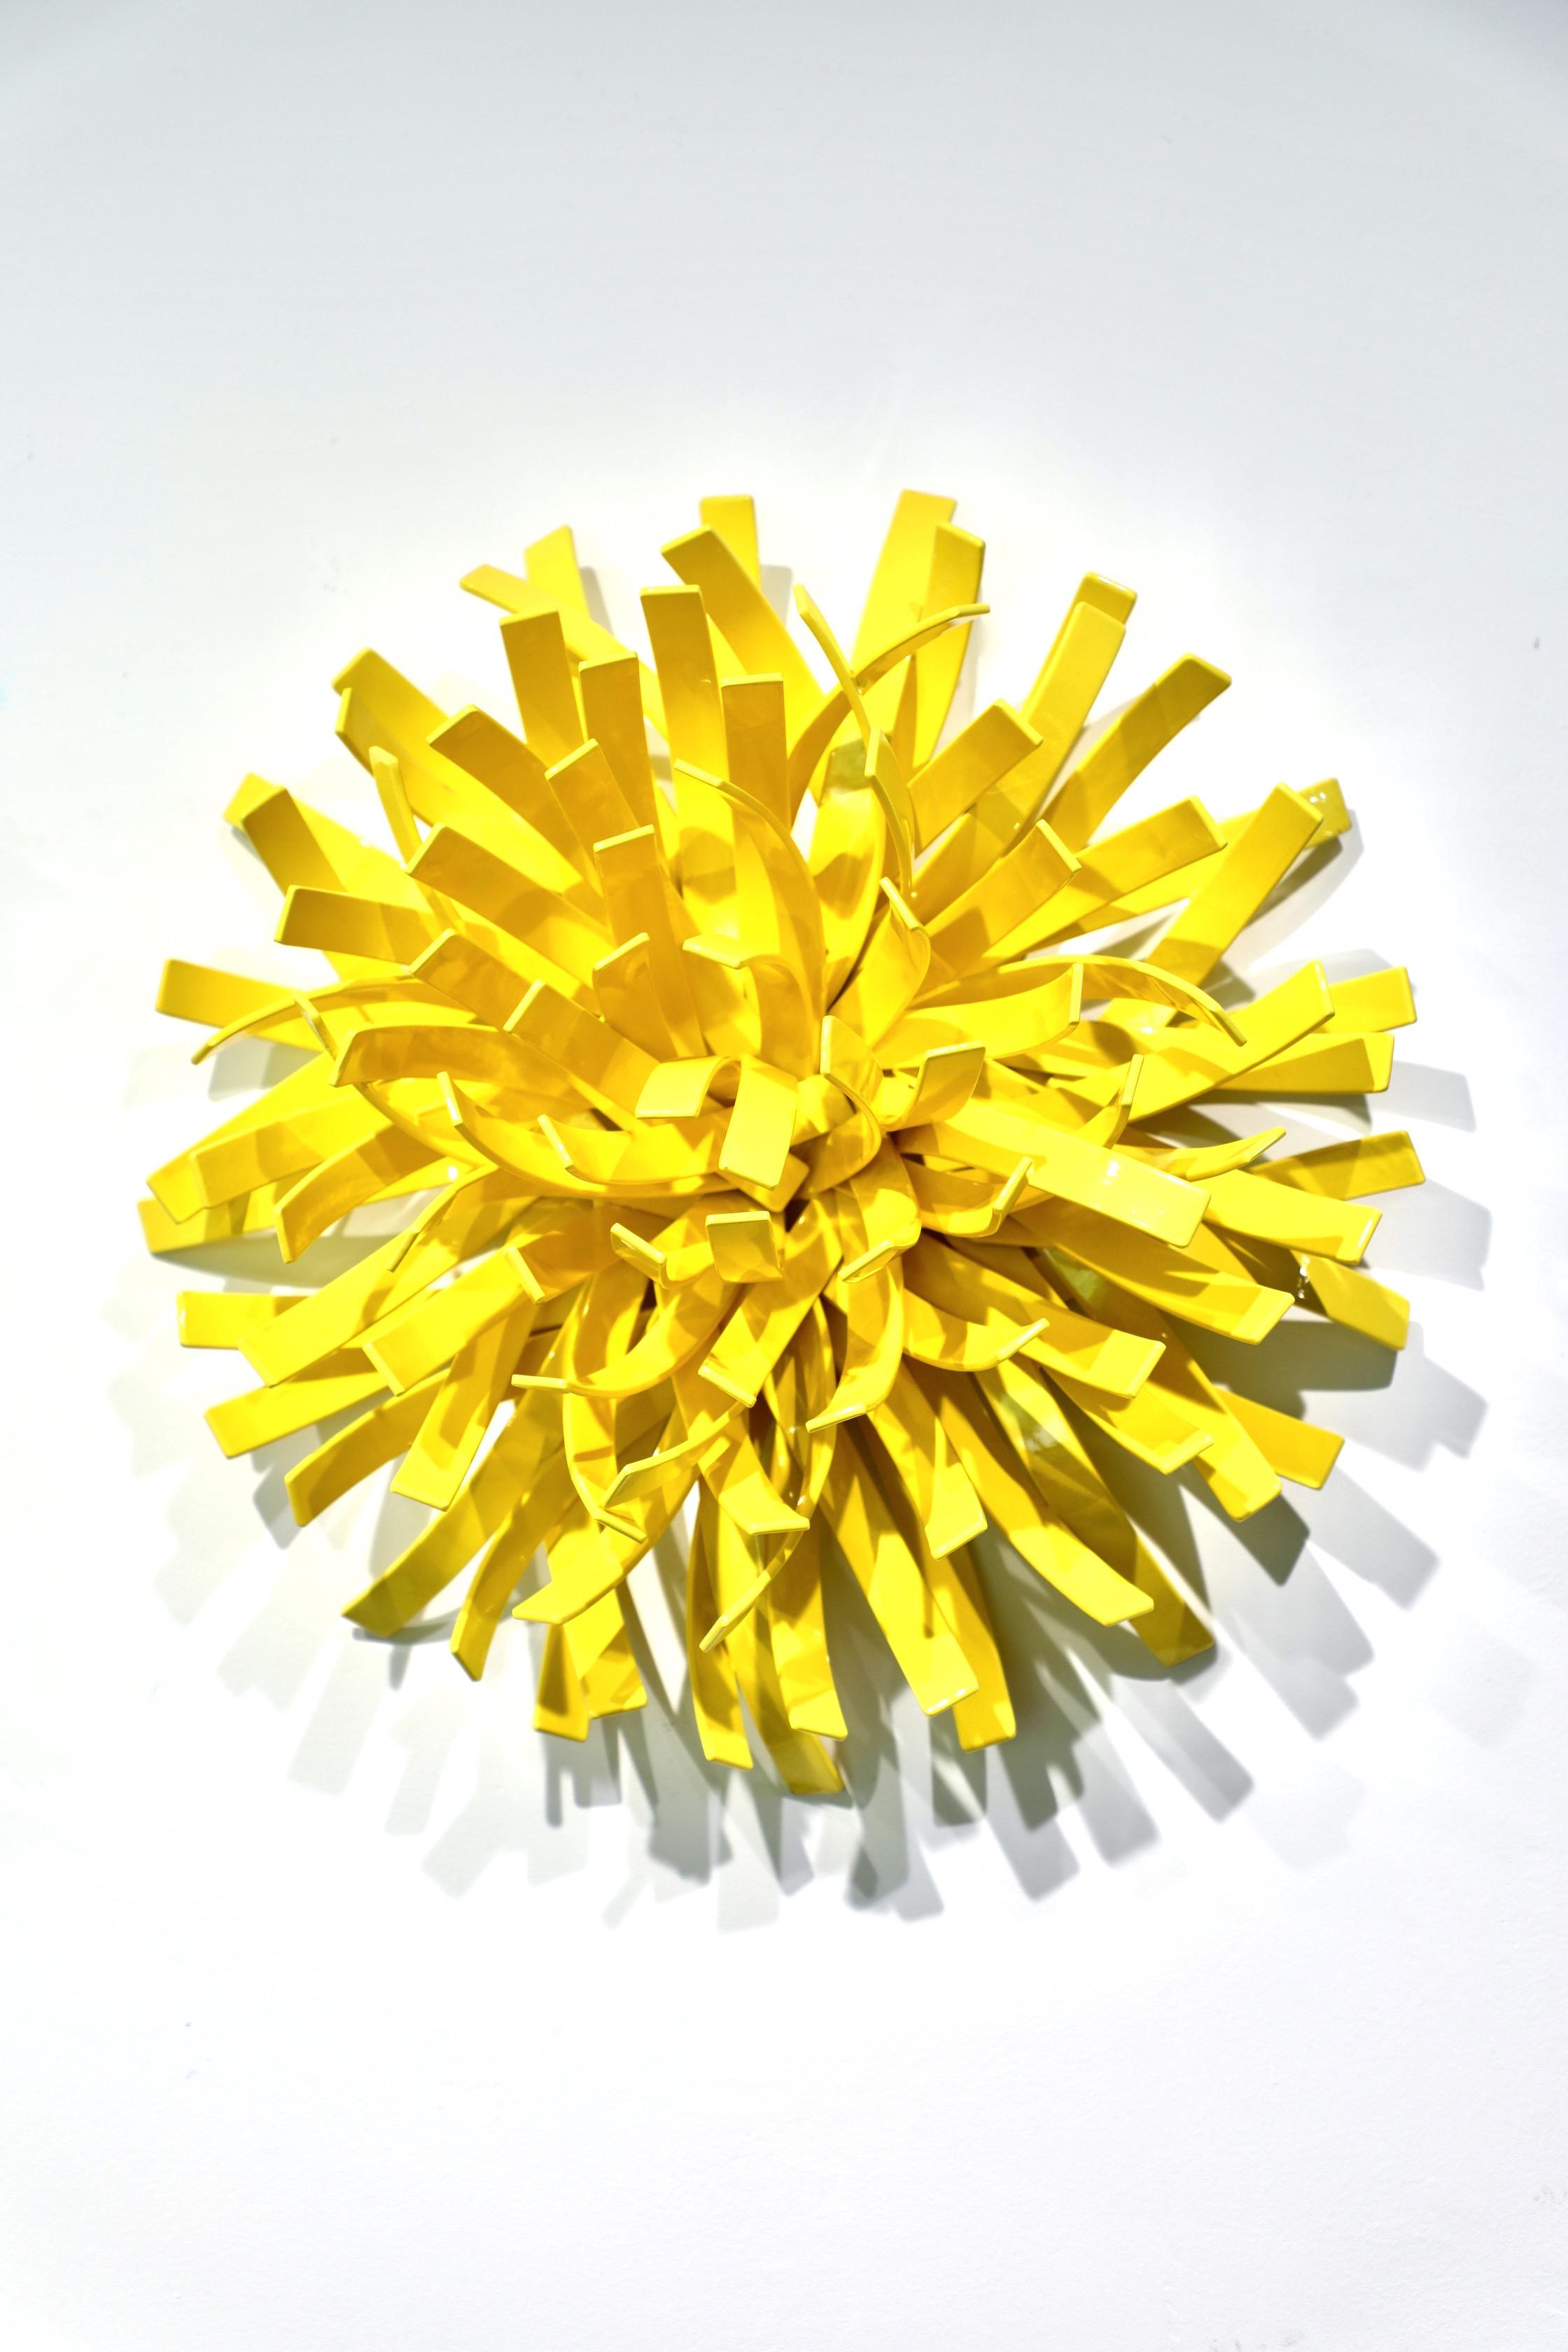 MATT DEVINE
"Anemones #3 (Yellow)"
Steel with Powdercoat (Indoor Only)
17 x 17 x 6 in. 
*Can be installed on wall or placed on table*


Matt Devine is a self-taught sculptor working with steel, aluminum and bronze. Born and raised in Salem,